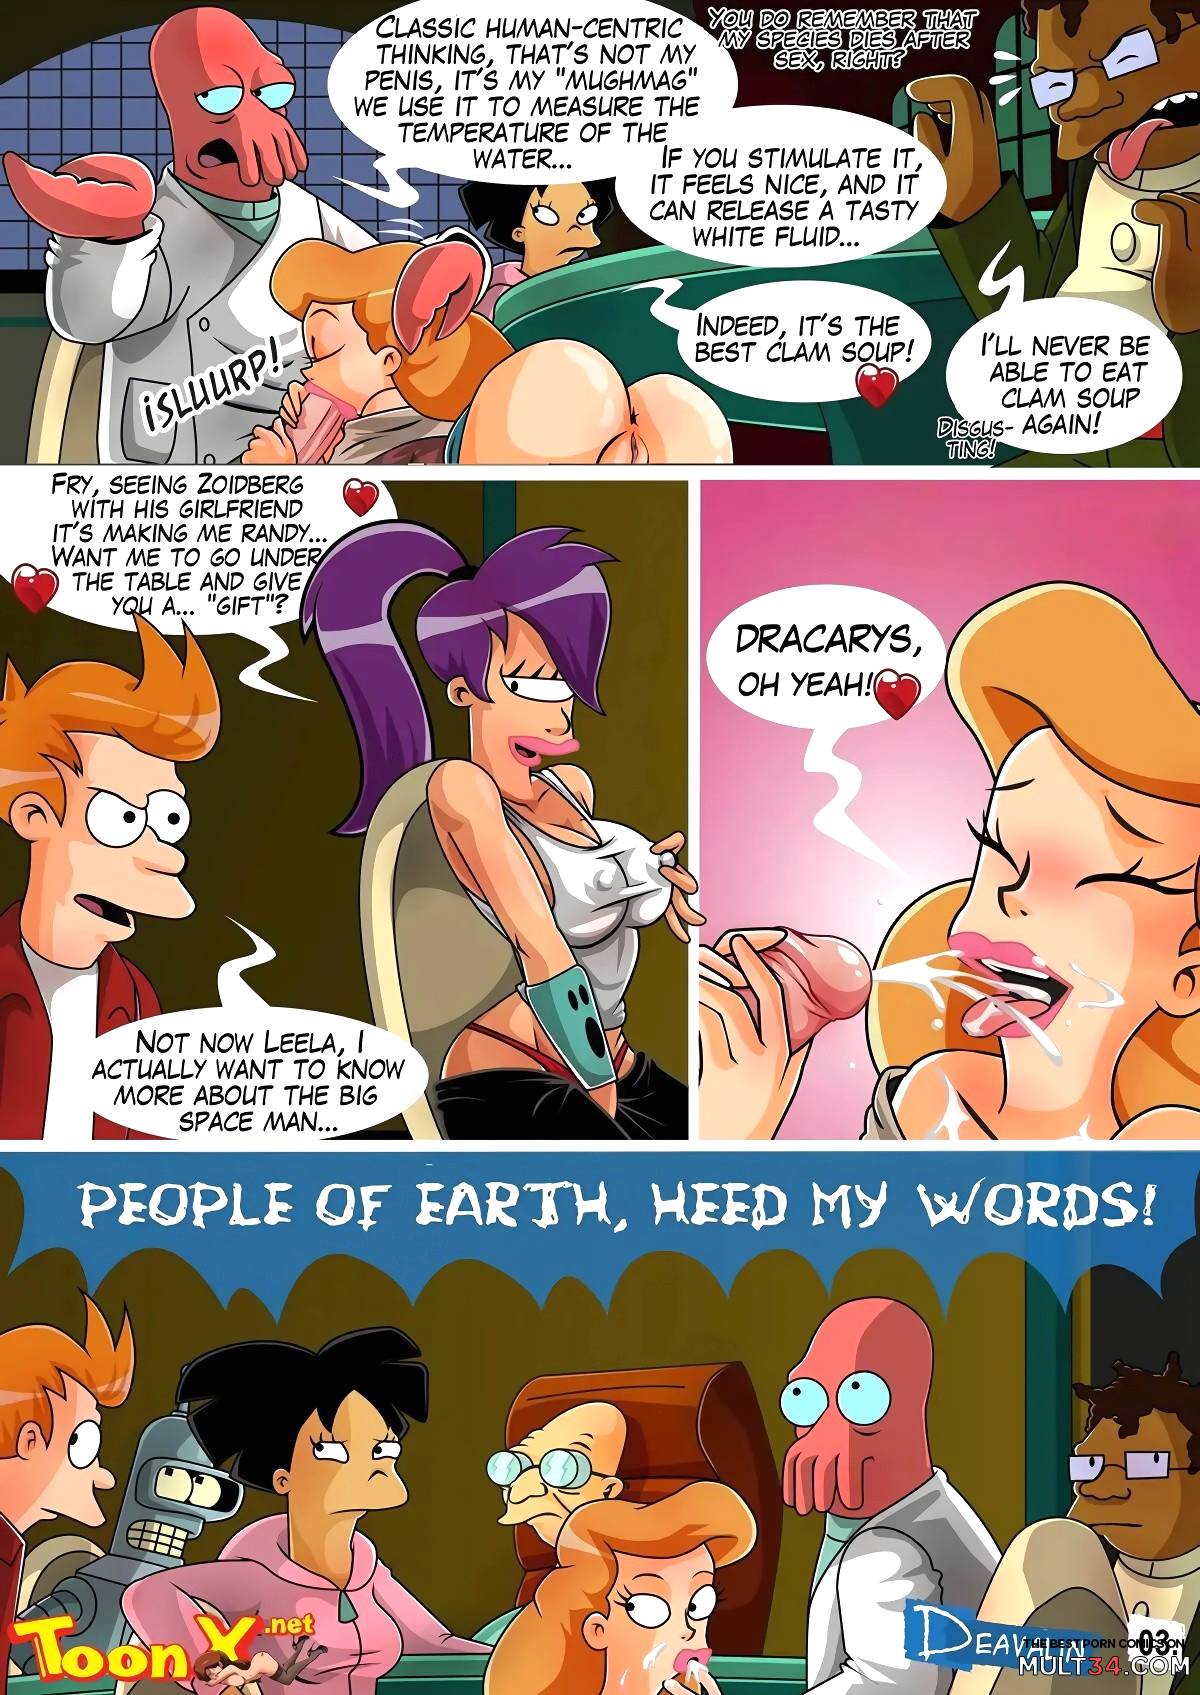 Orgy To Save The Earth page 4